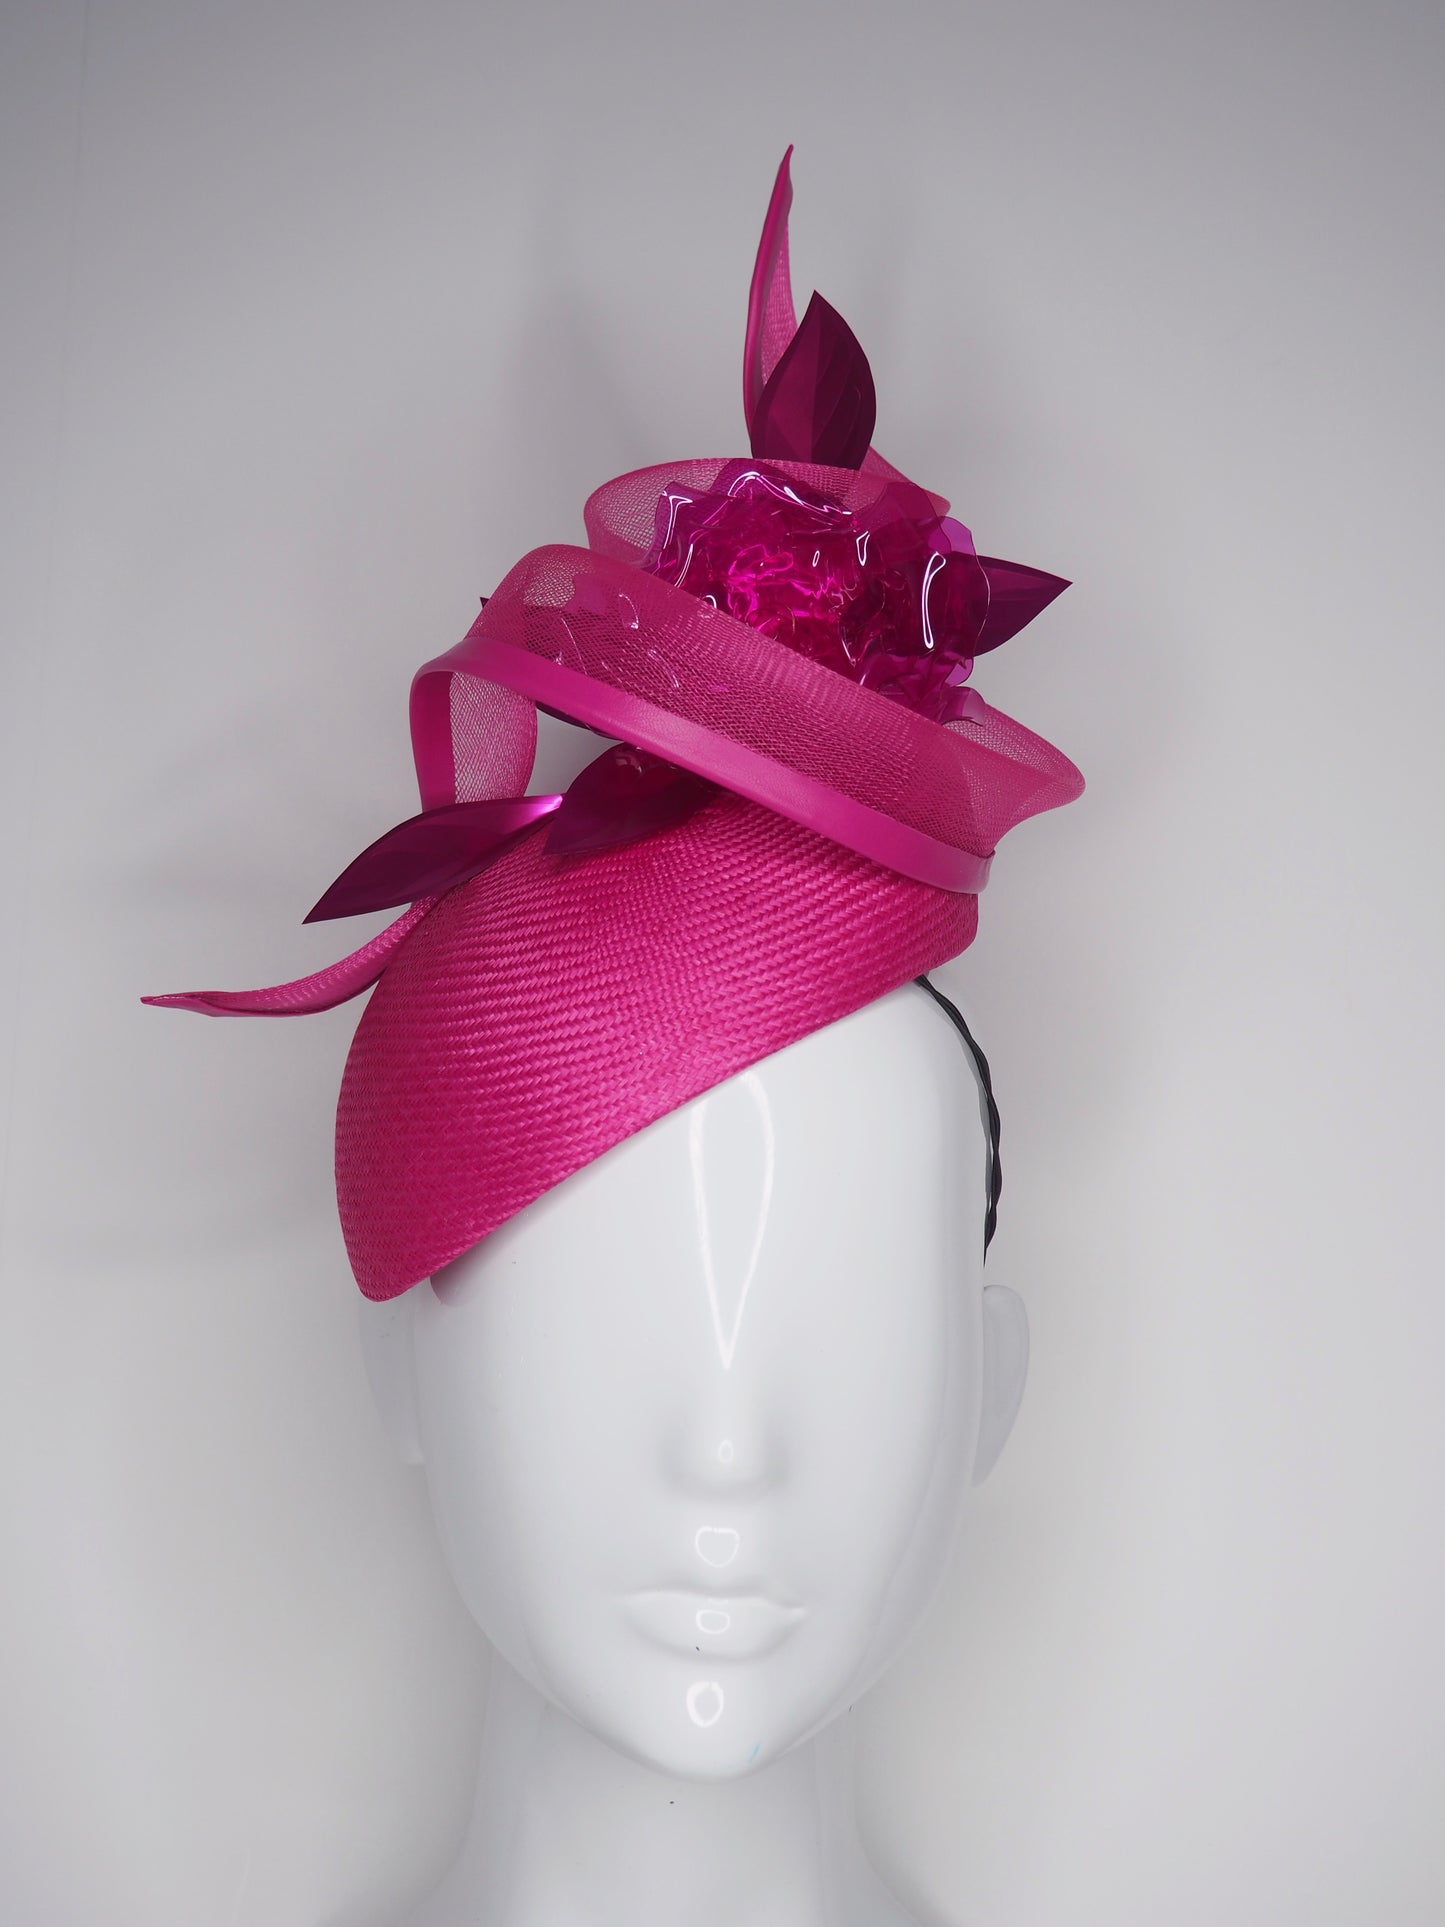 Hot Magenta - Hot pink parisissal straw with Crinoline swirl, oversize crystoform rose and magenta accents